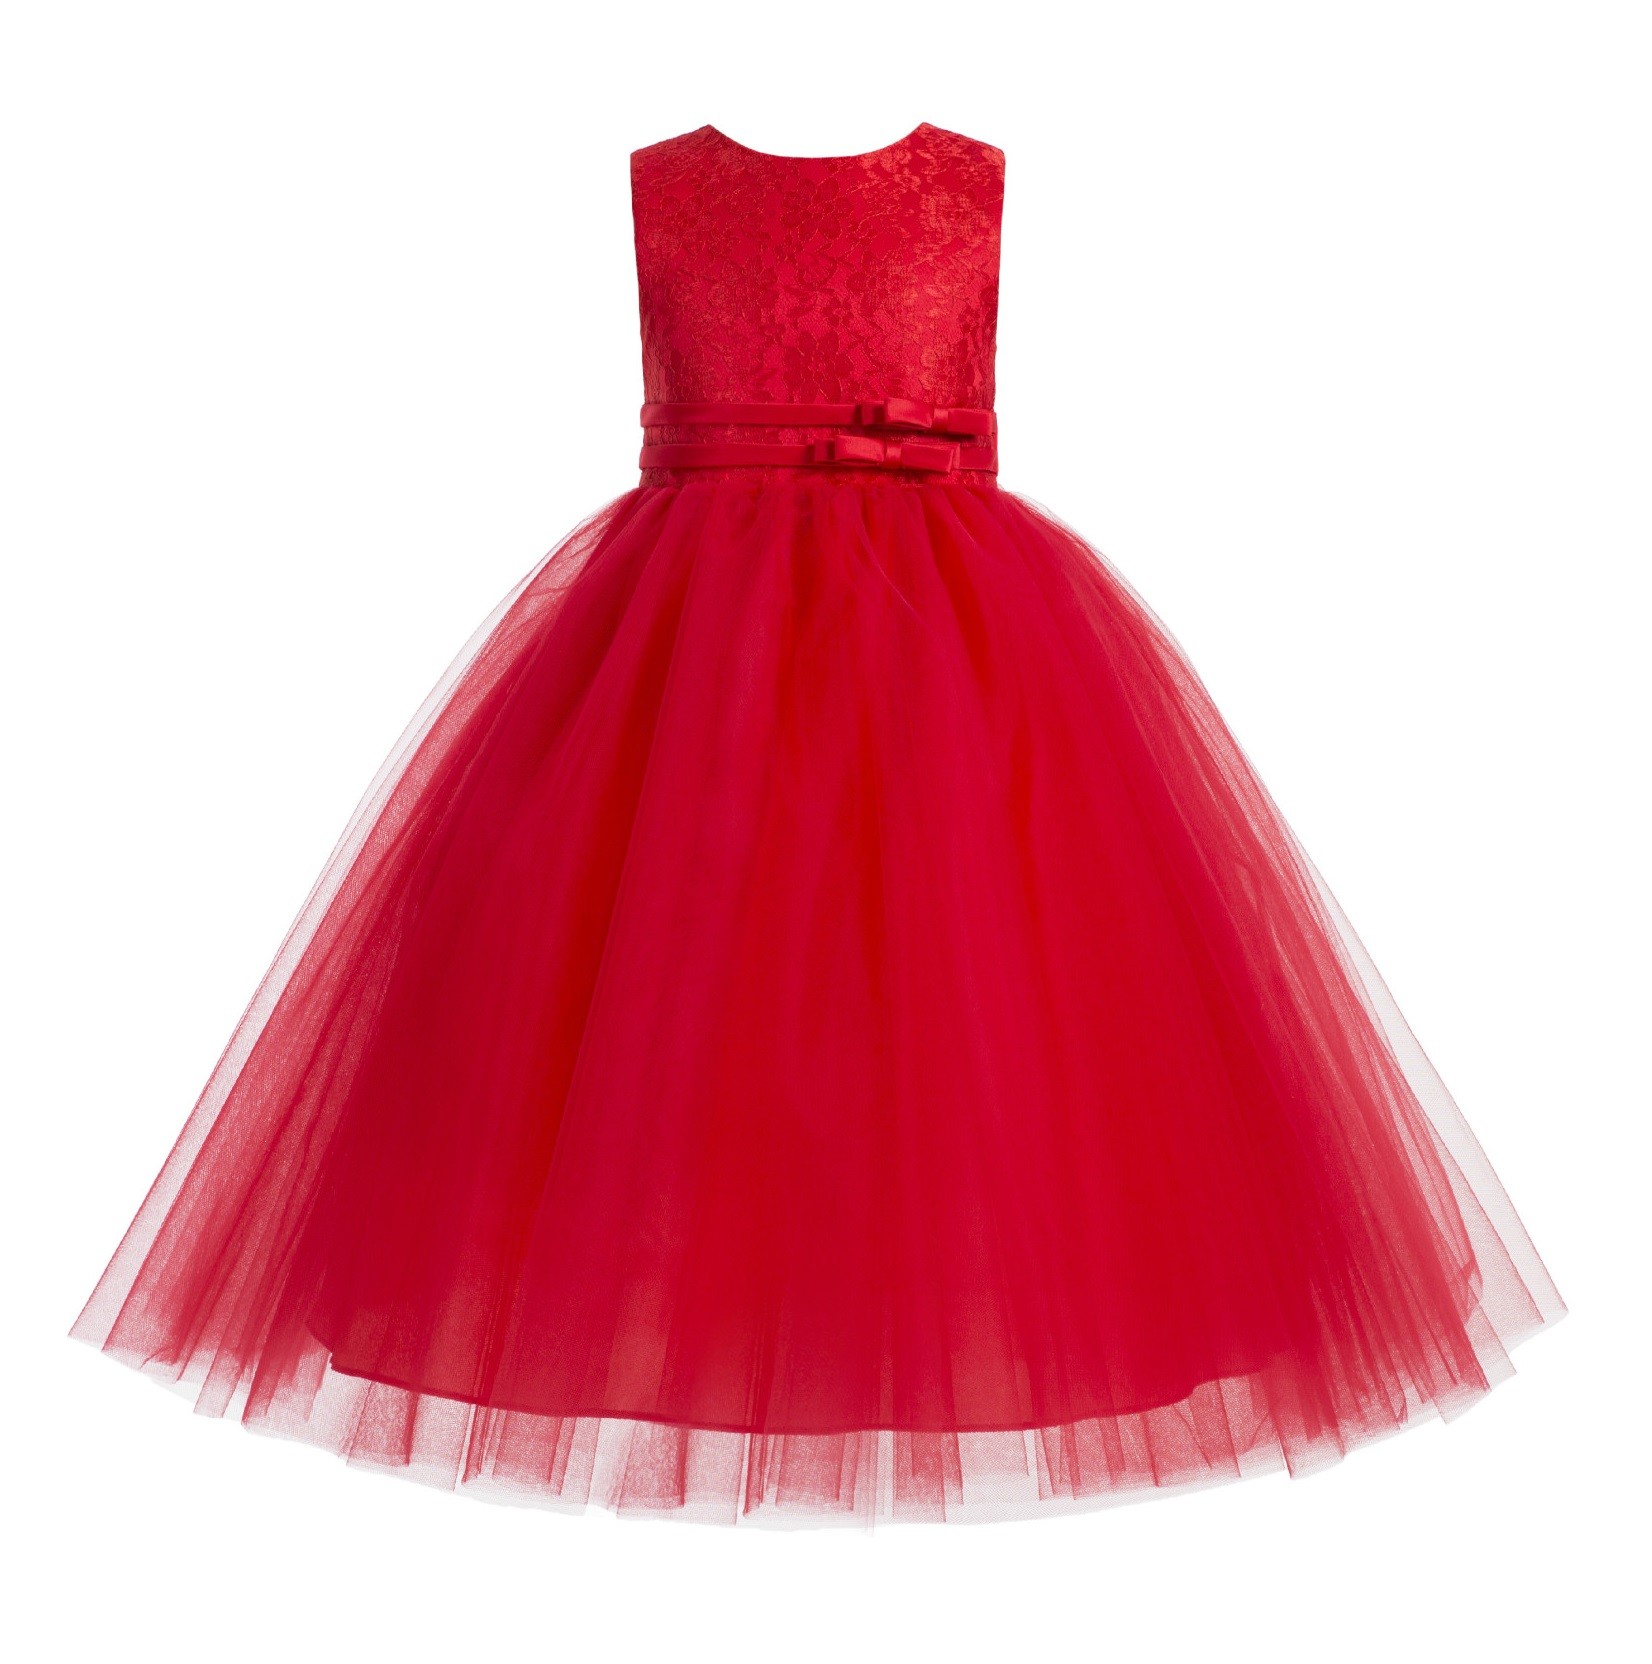 Red Lace Tulle Tutu Flower Girl Dress 188